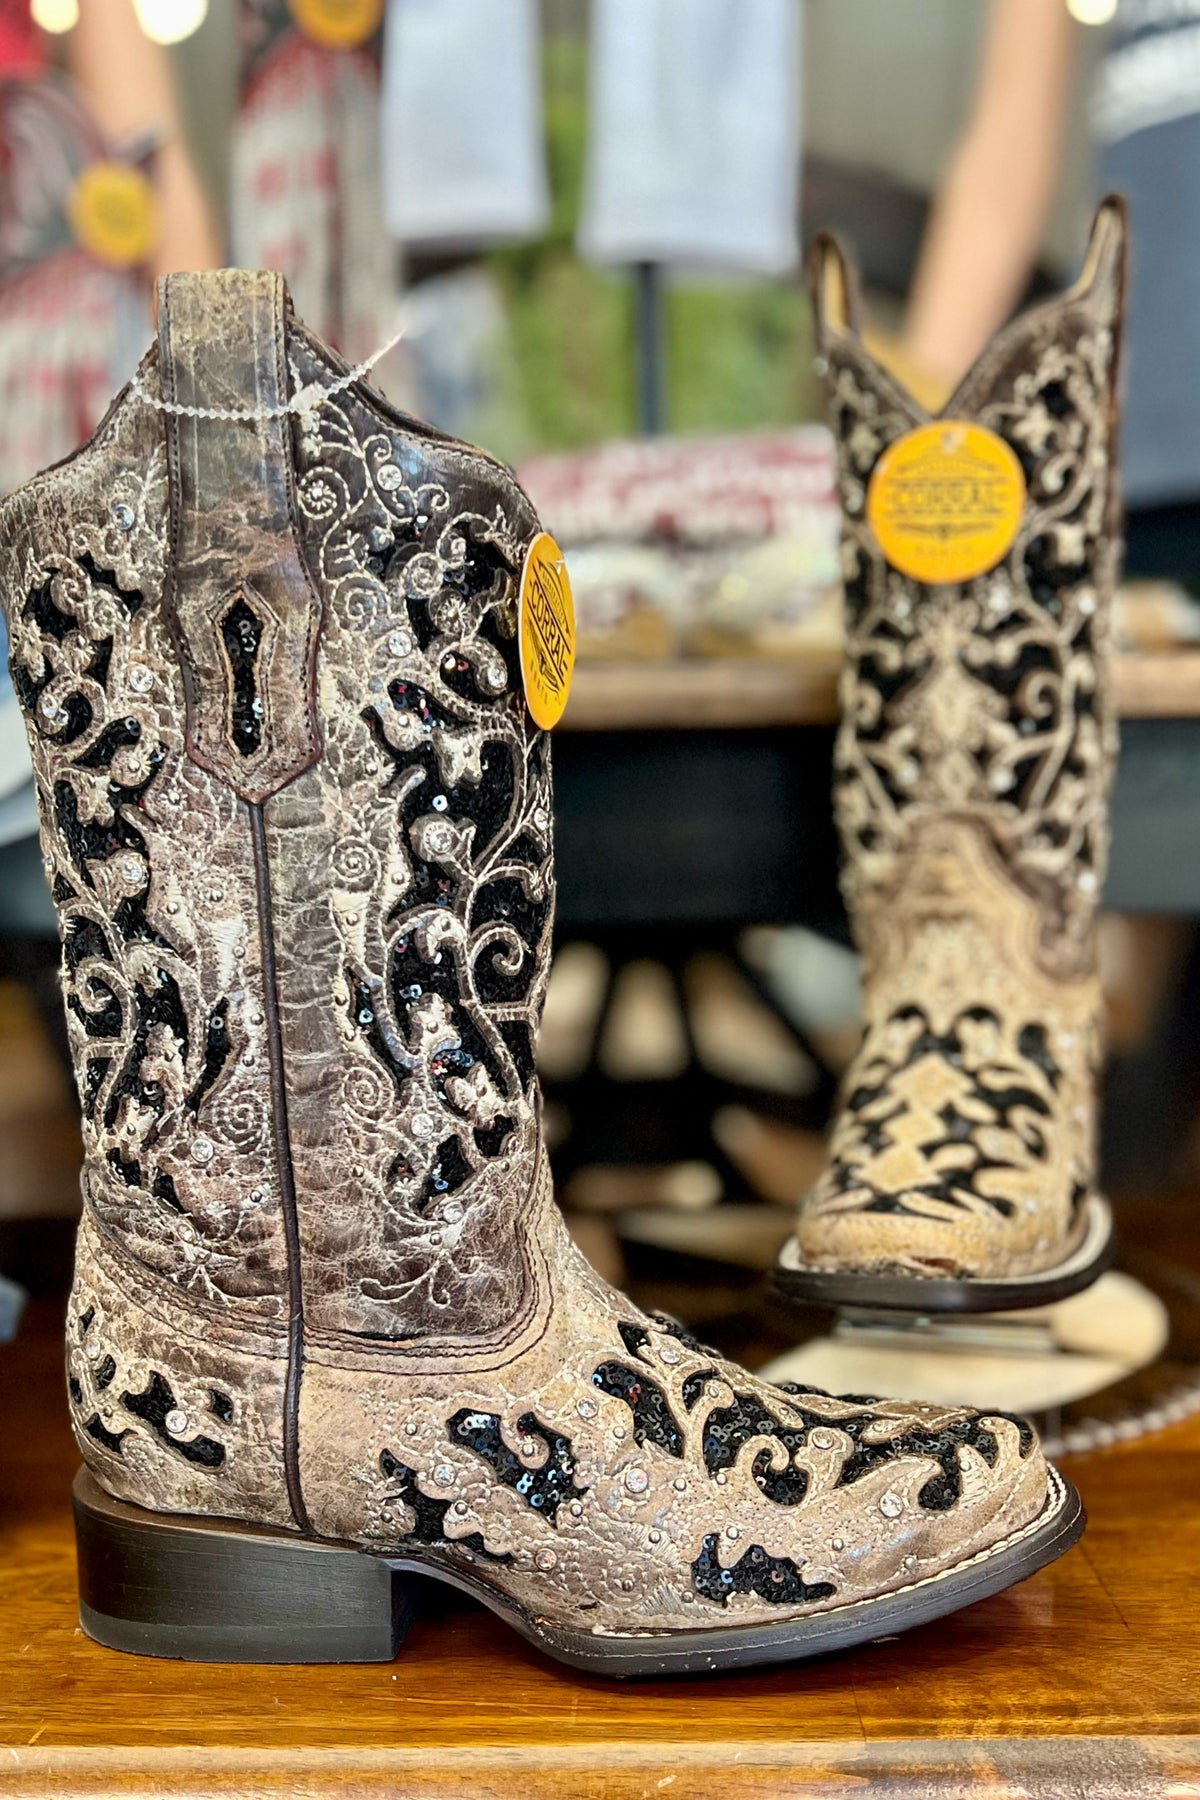 Corral Floral Embroidered Sequin Inlay Suare Toe Boot-Women's Boot-Corral Boots-Gallop 'n Glitz- Women's Western Wear Boutique, Located in Grants Pass, Oregon